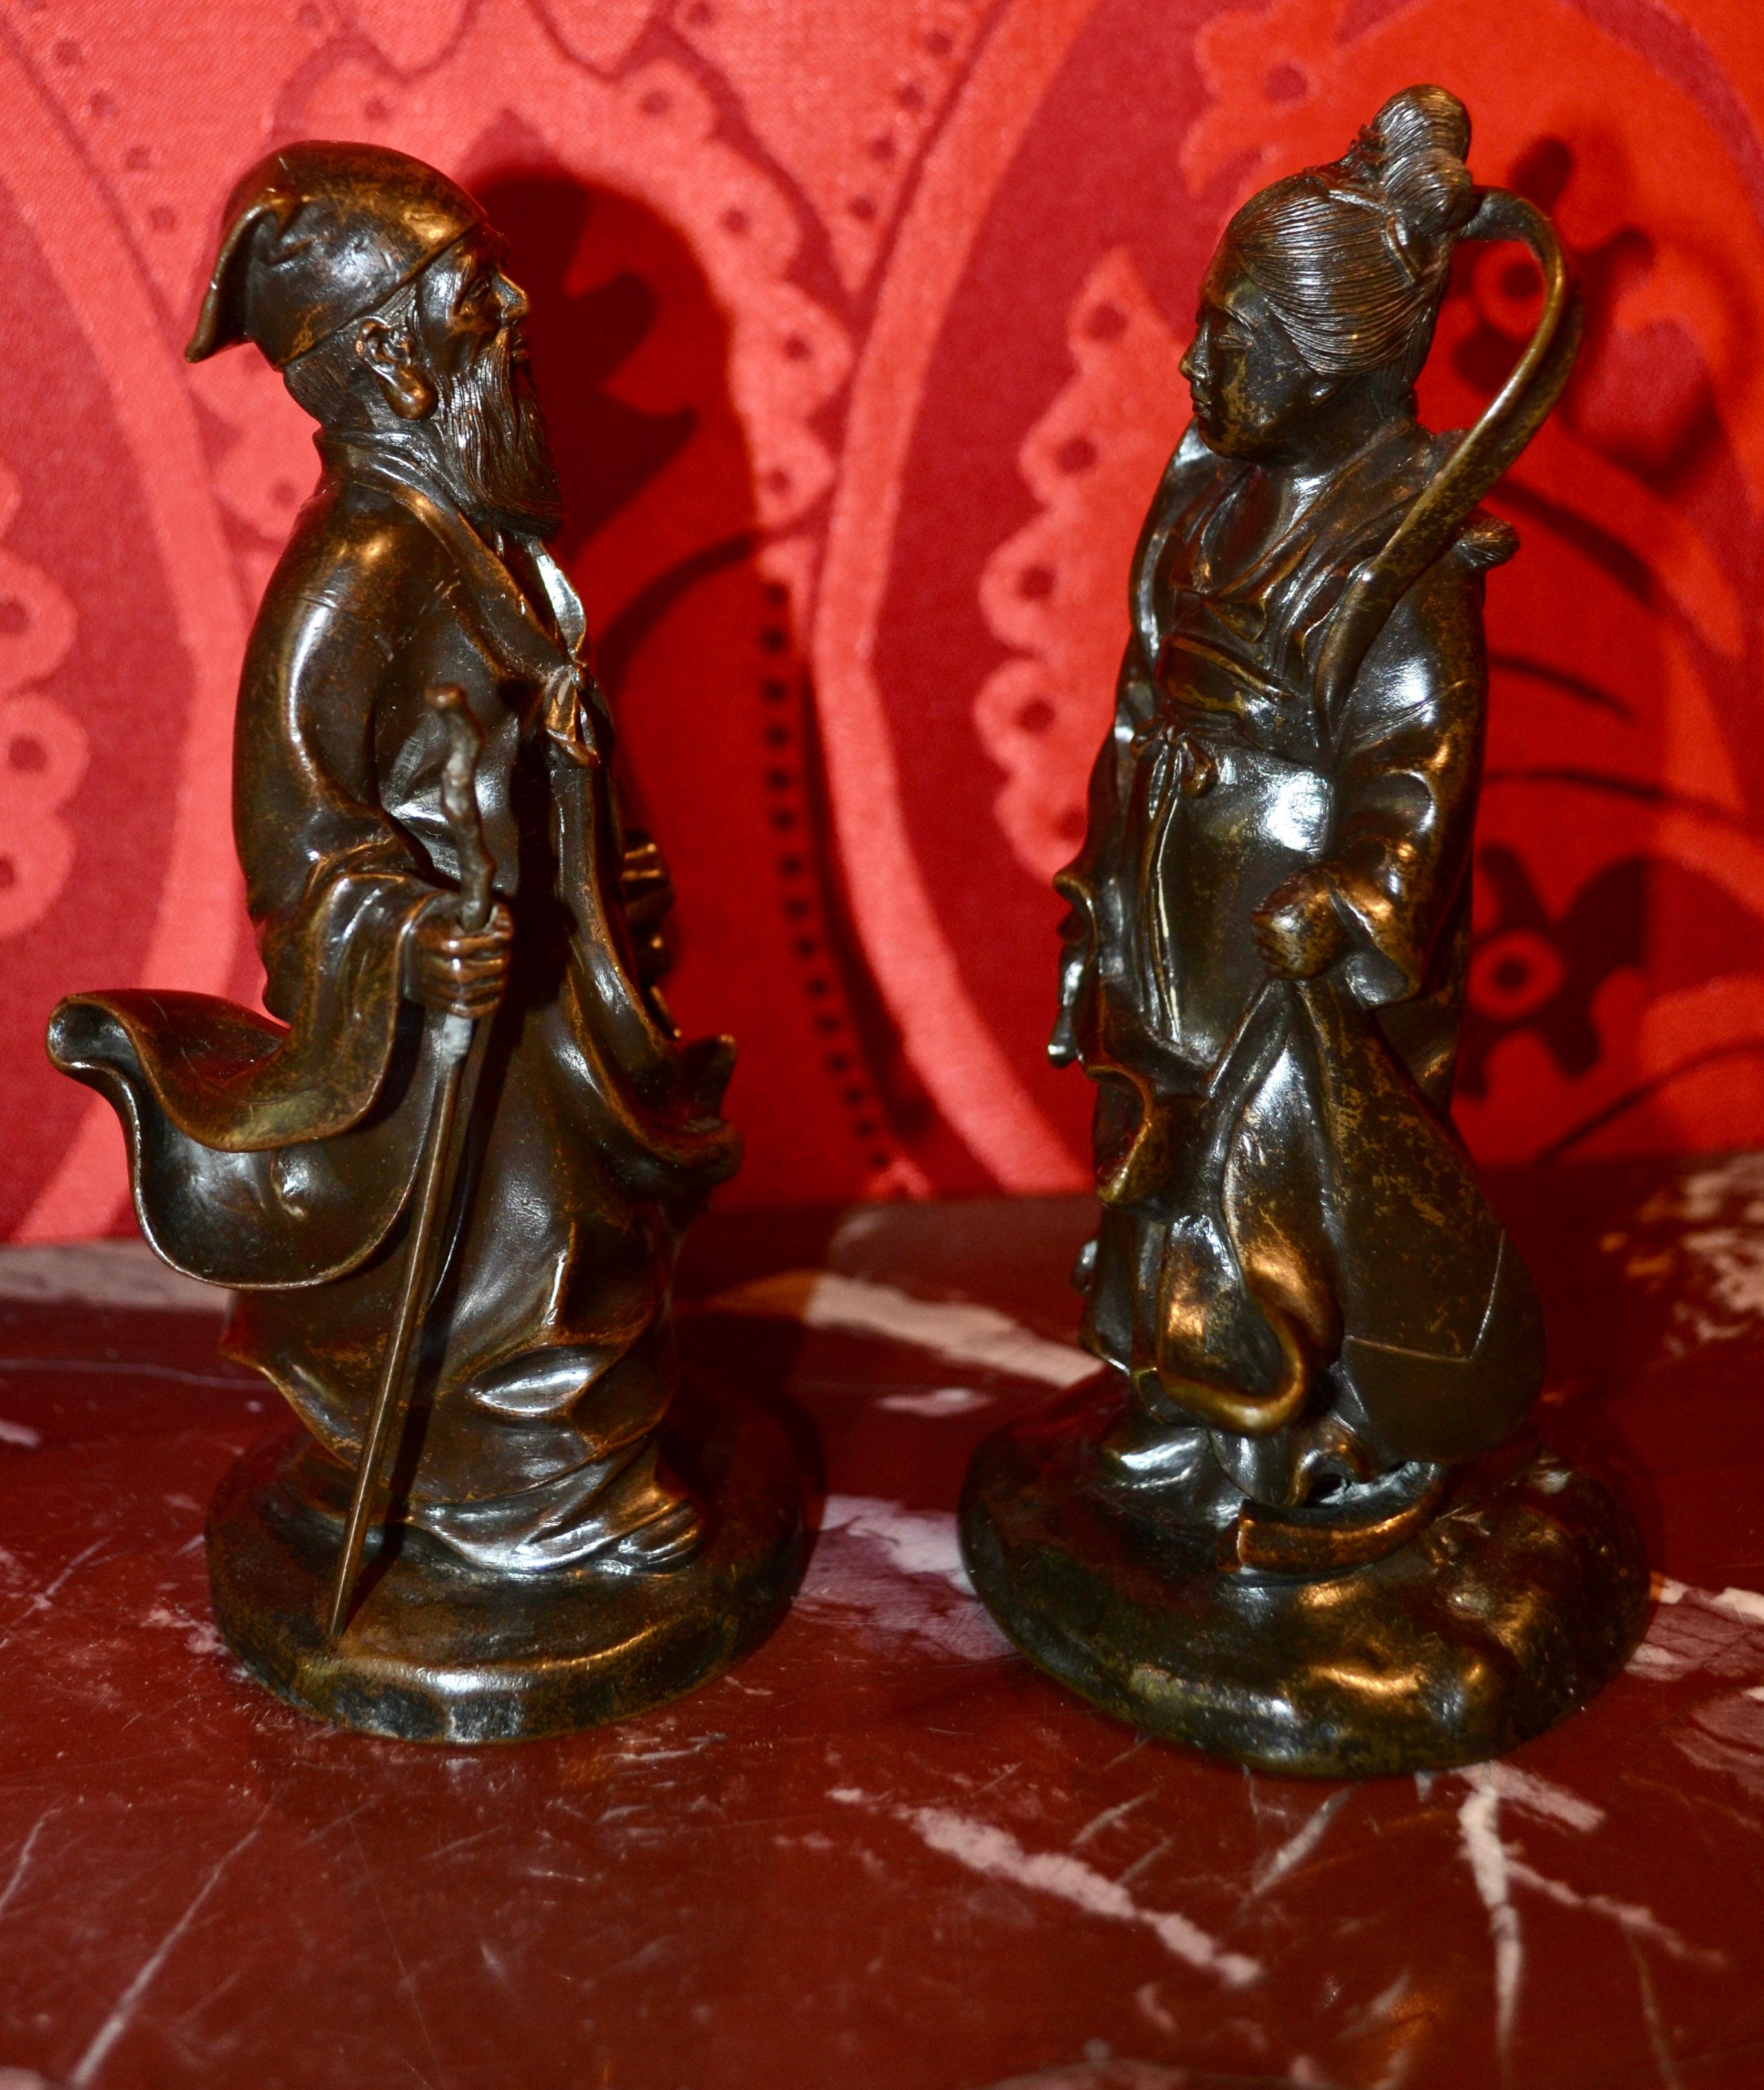 A Pair of Small 19 Century Chinese Patinated Bronze Statues of Gods or Deities   In Fair Condition For Sale In Vancouver, British Columbia